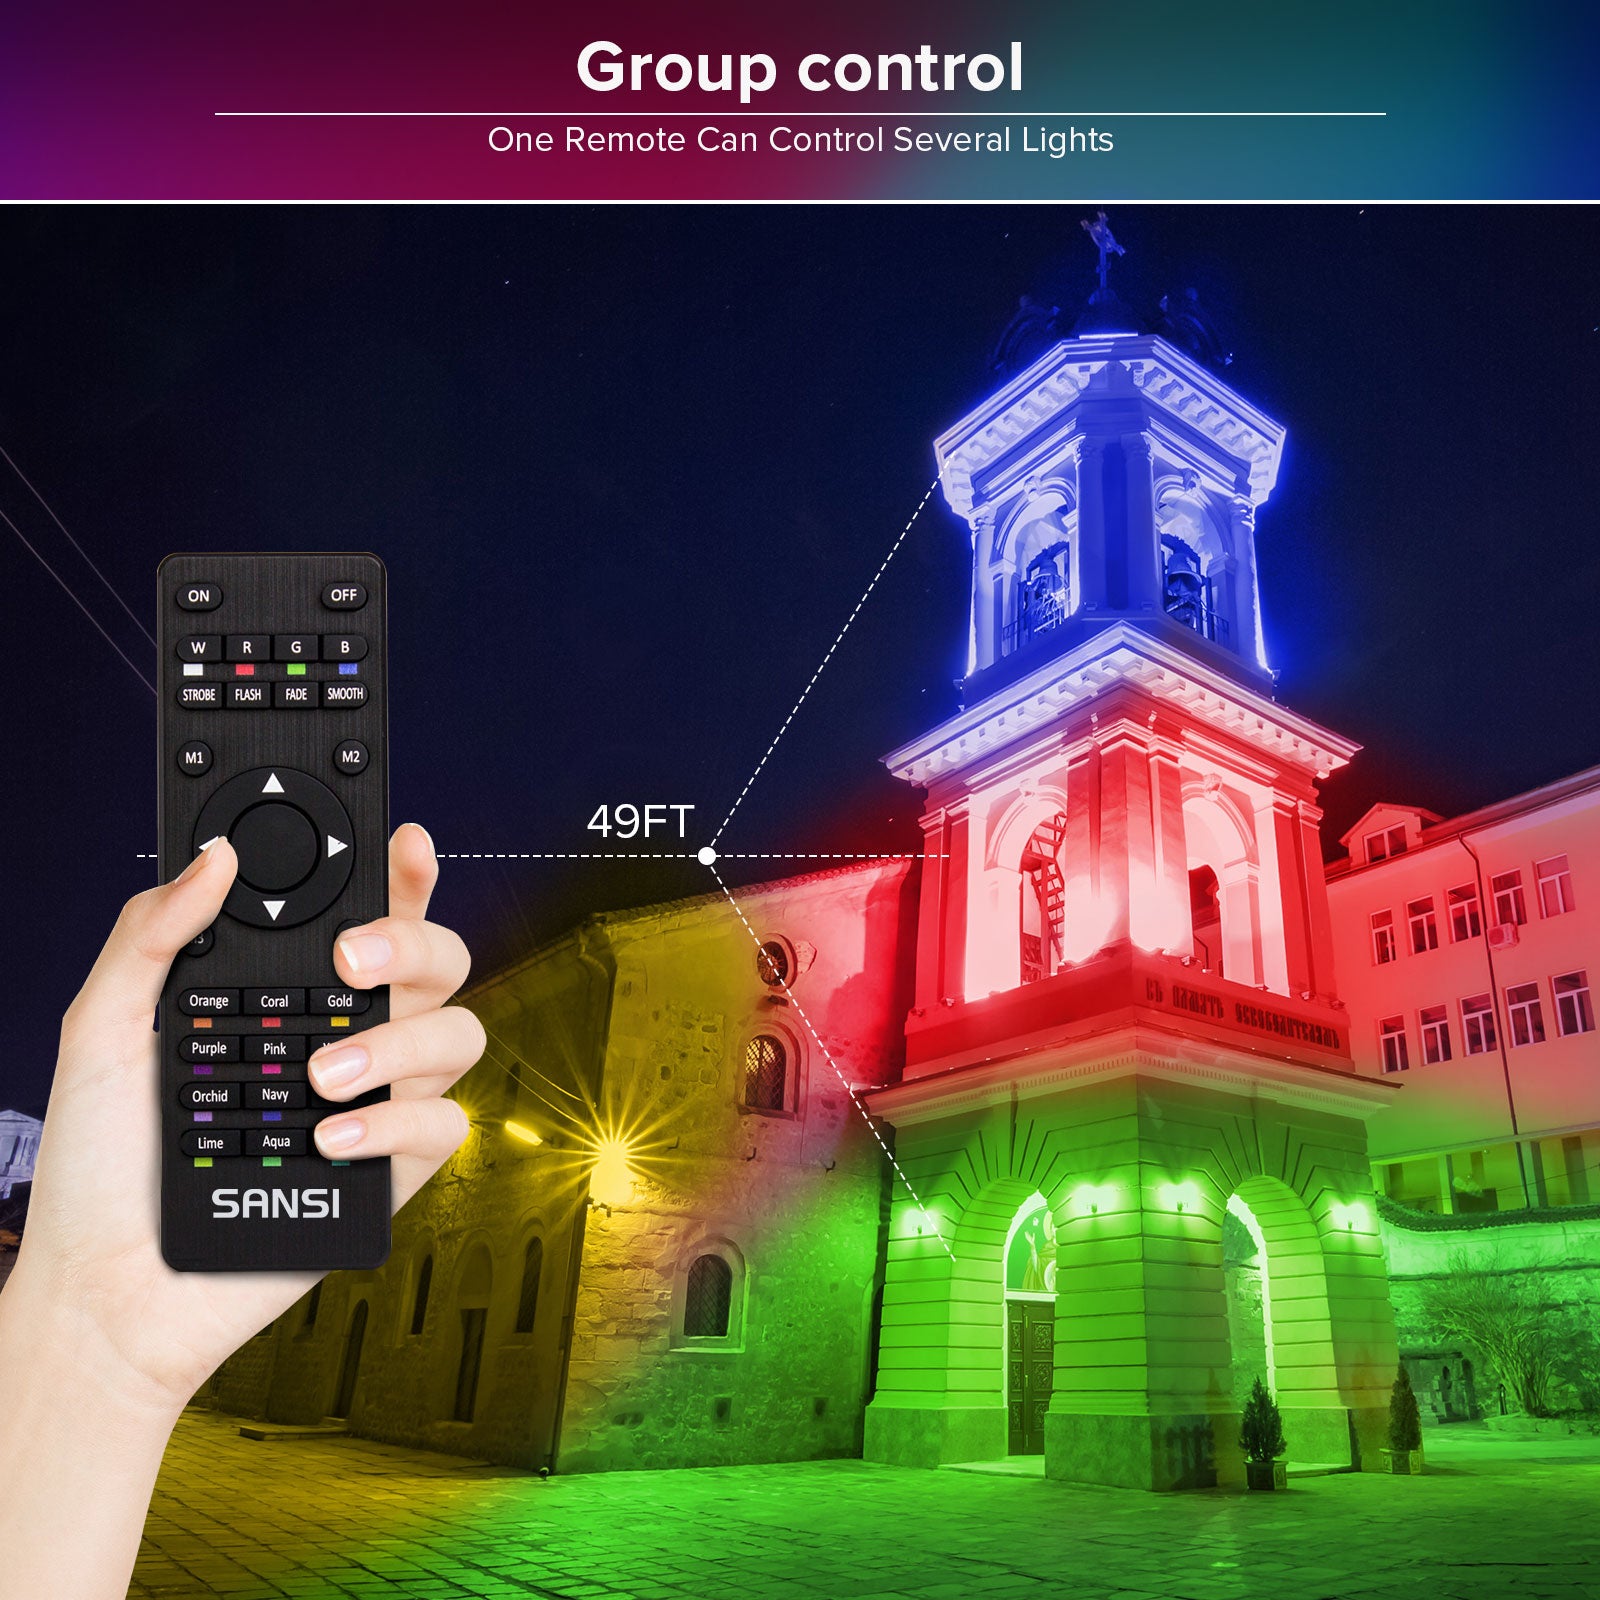 Upgraded 50W RGB LED Flood Light (US ONLY) has group control function，one remote can control several lights.